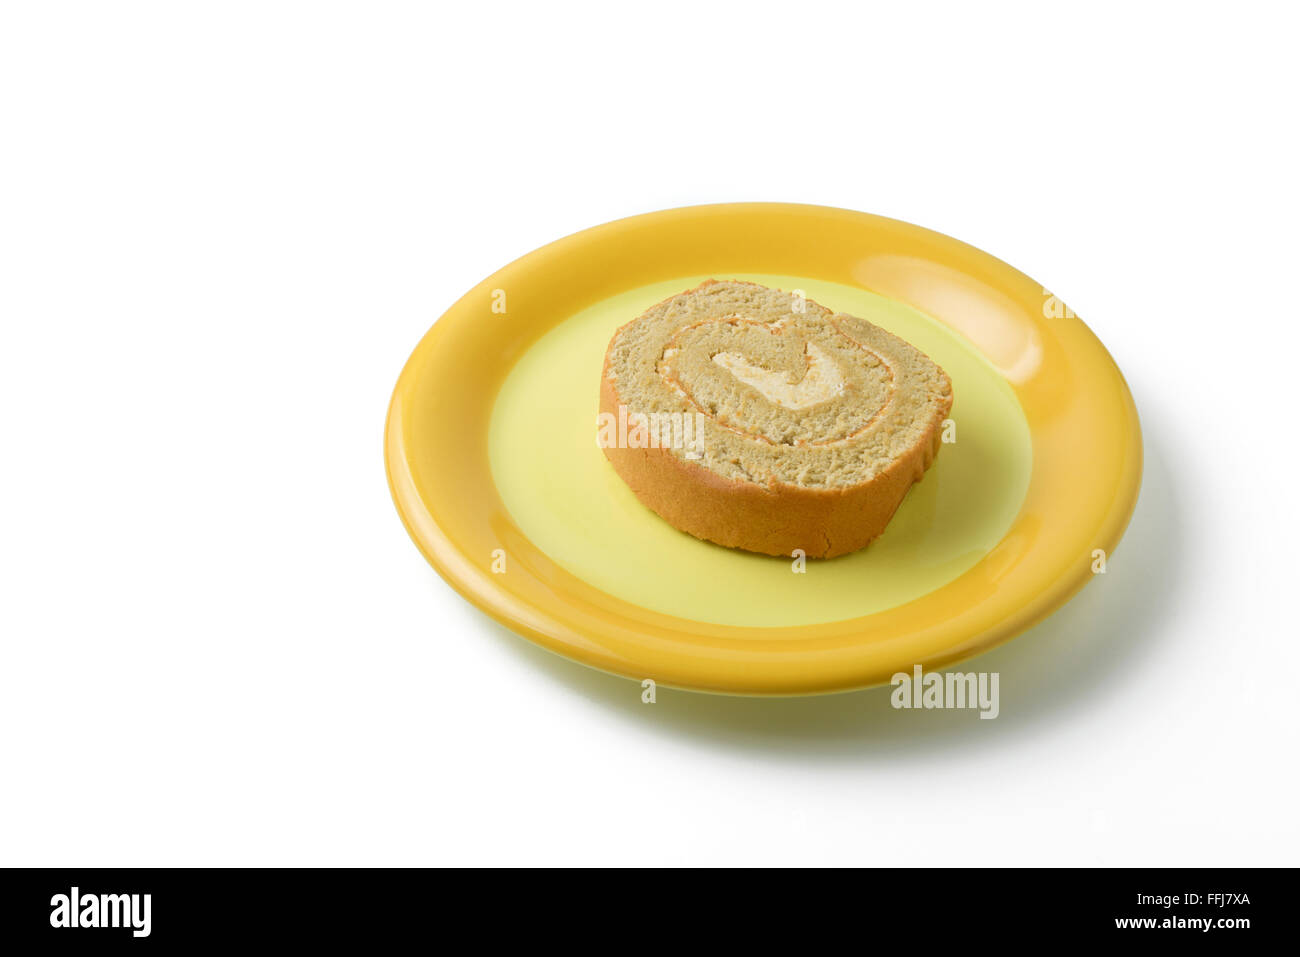 Jam roll on plate isolated on white Banque D'Images